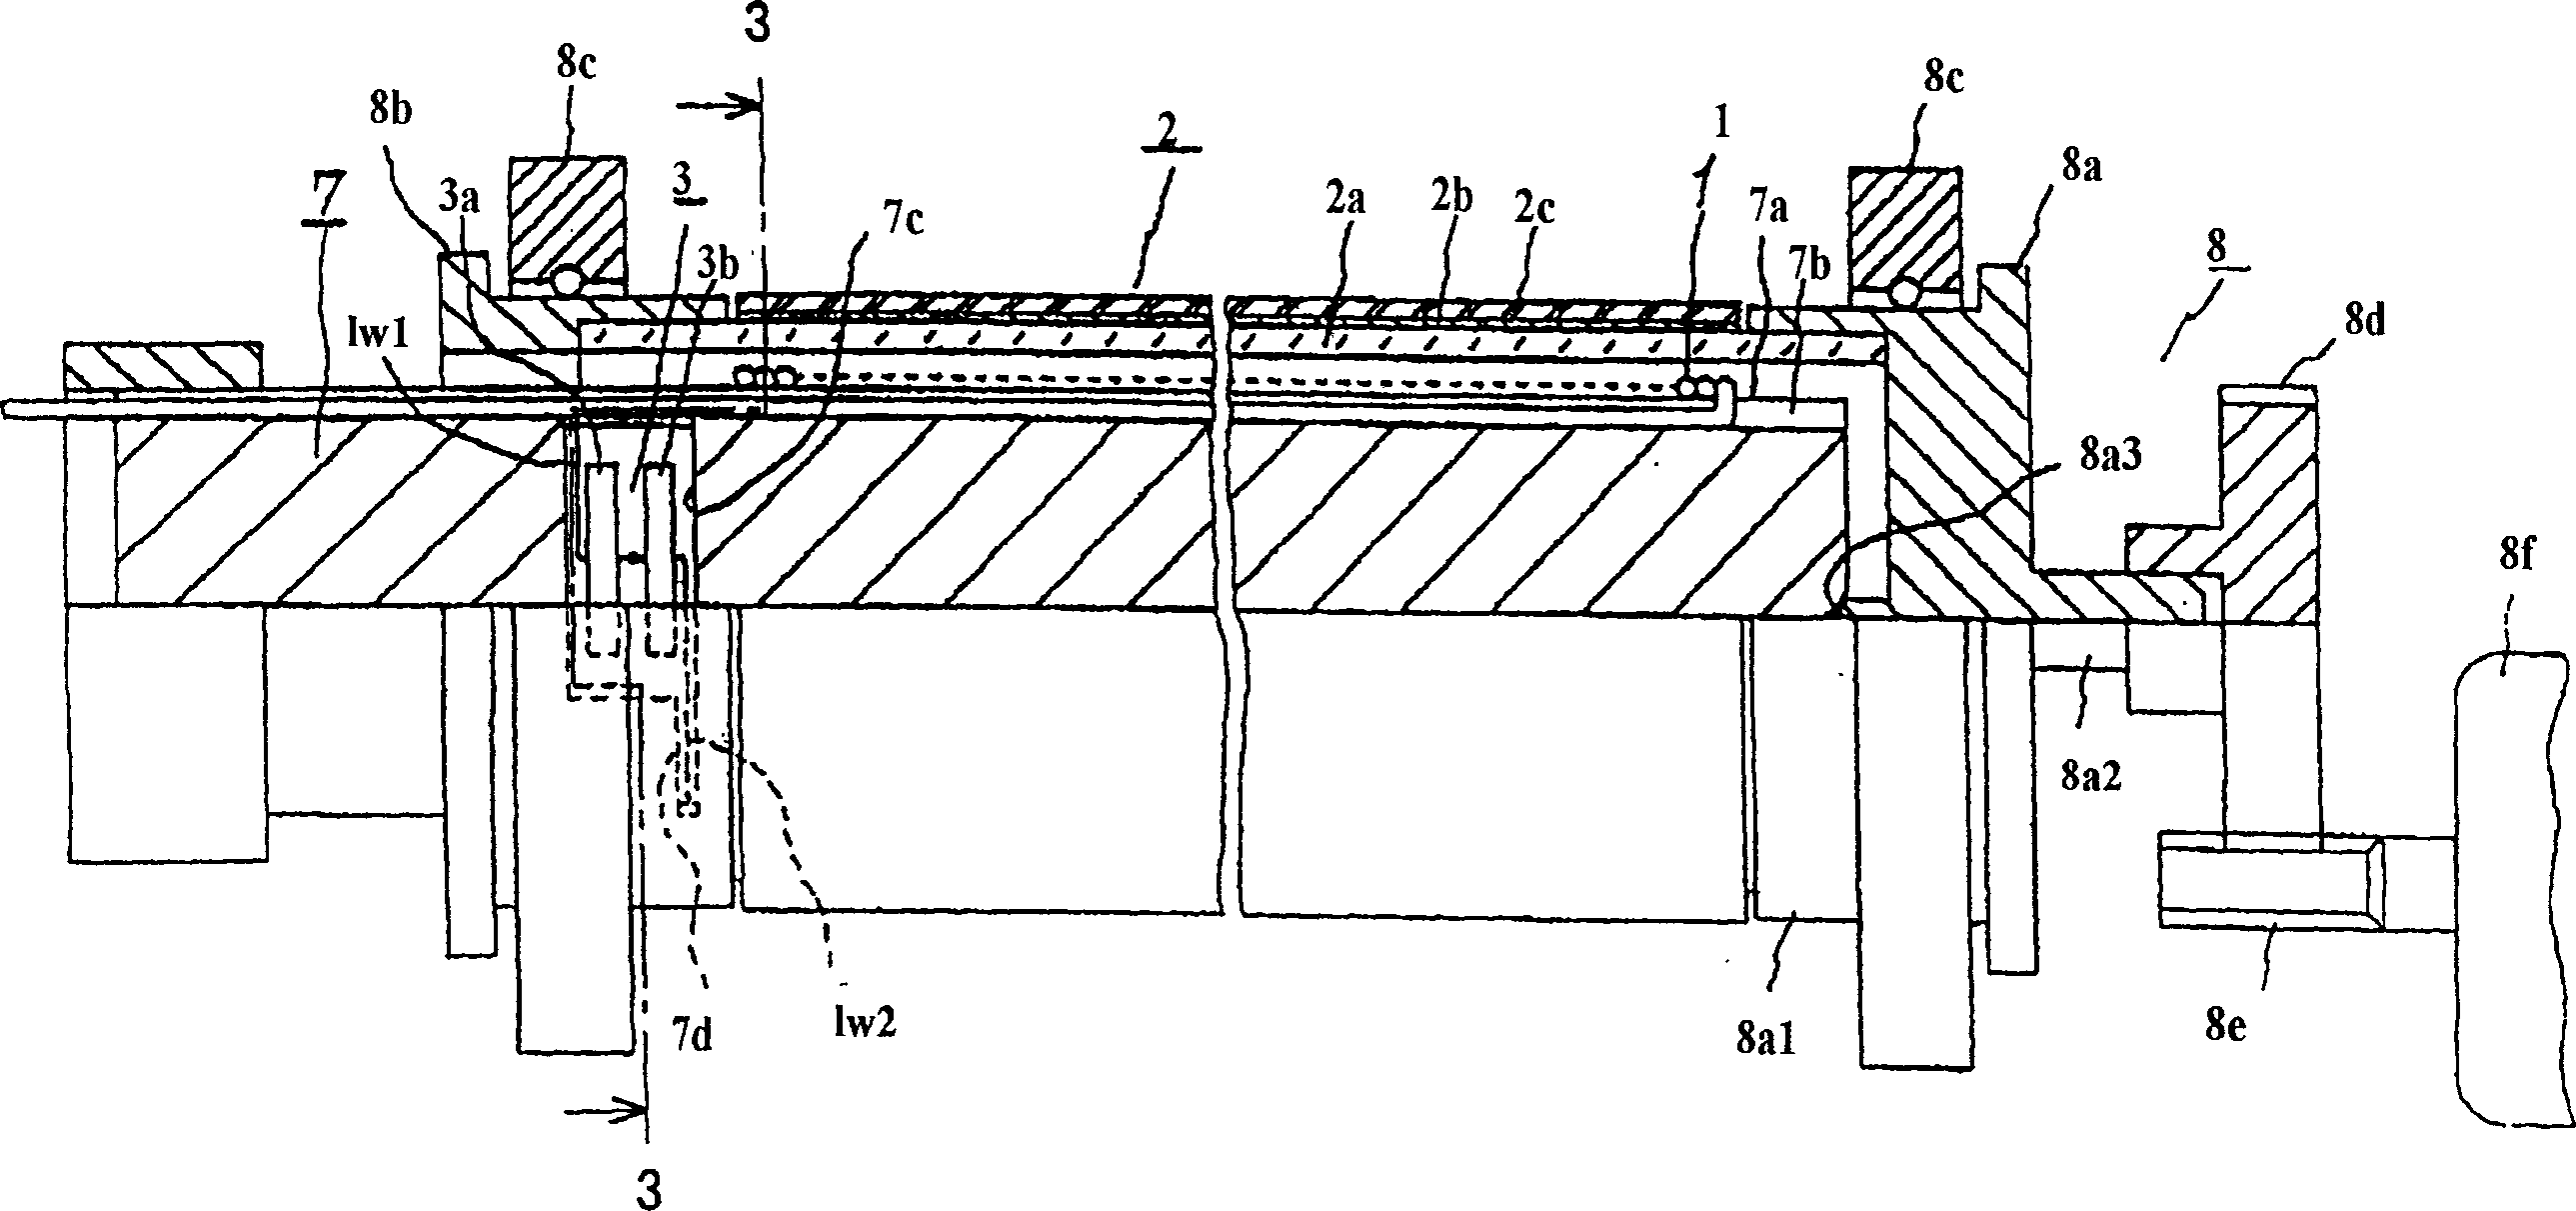 Induction heating roller device for use in image forming apparatus